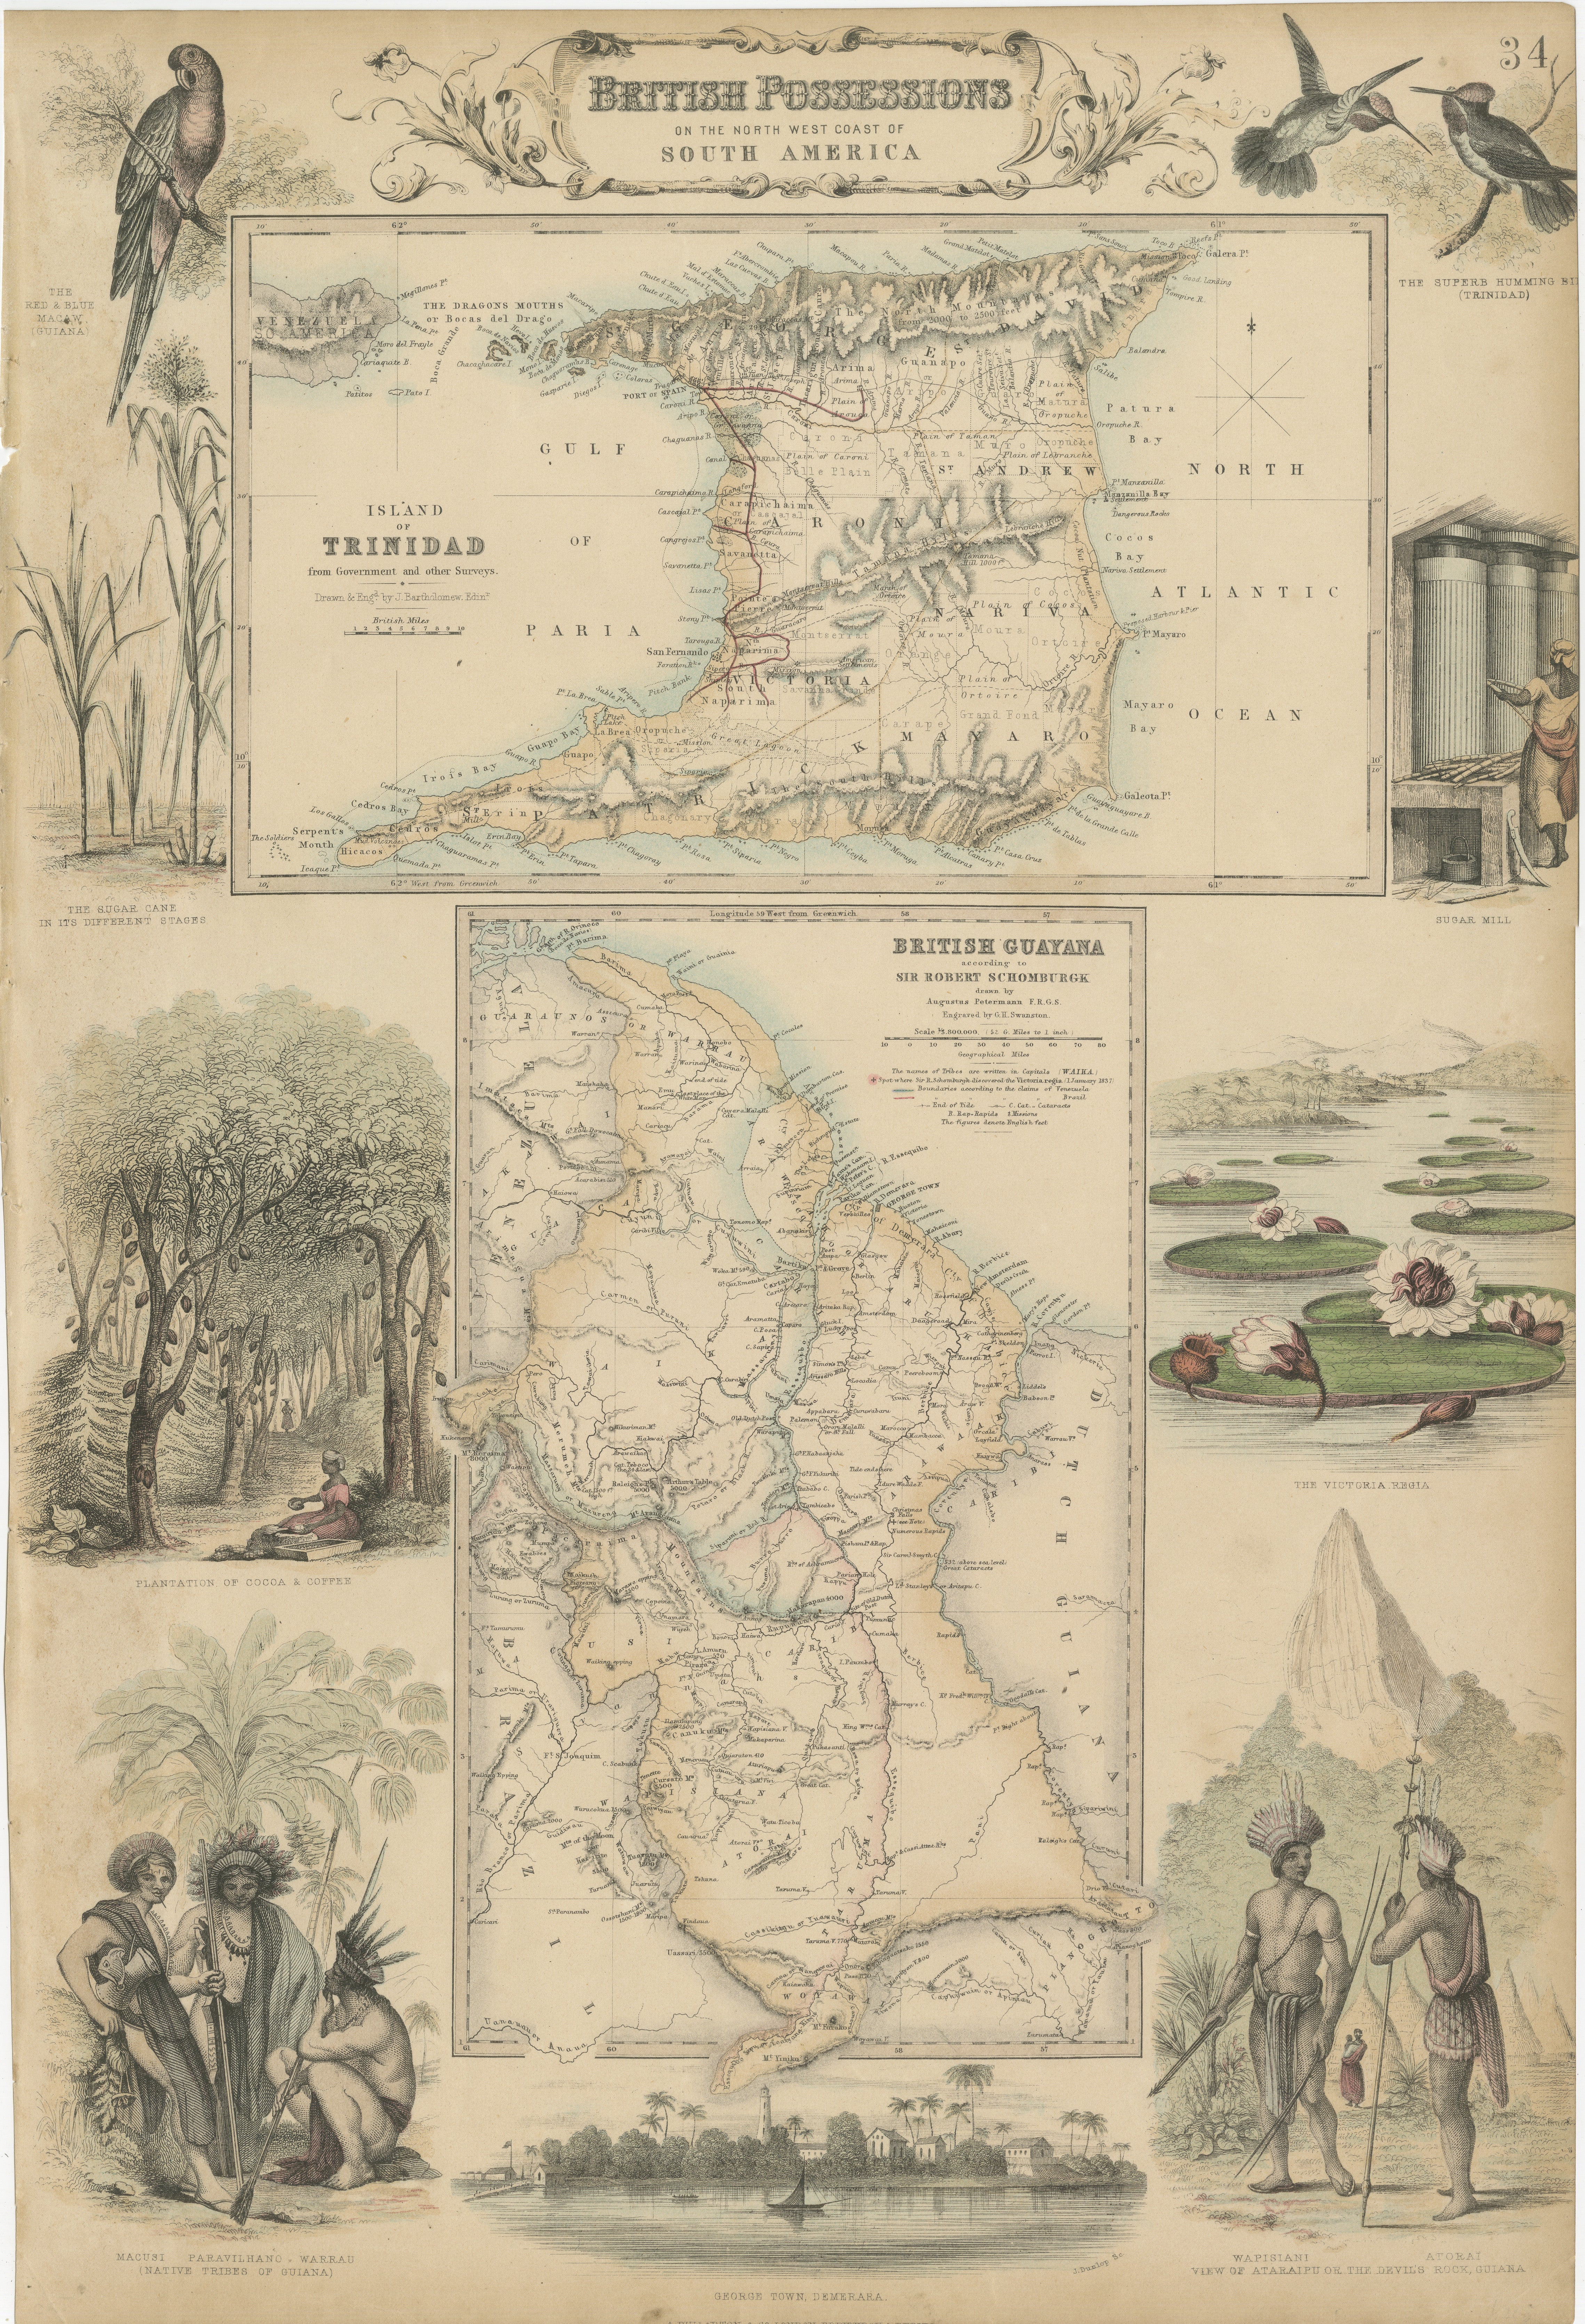 The antique print is a page from an 1860 A Fullarton atlas, providing a comprehensive view of the British possessions on the northwest coast of South America during that time. It features a detailed map of the Island of Trinidad, as well as maps of